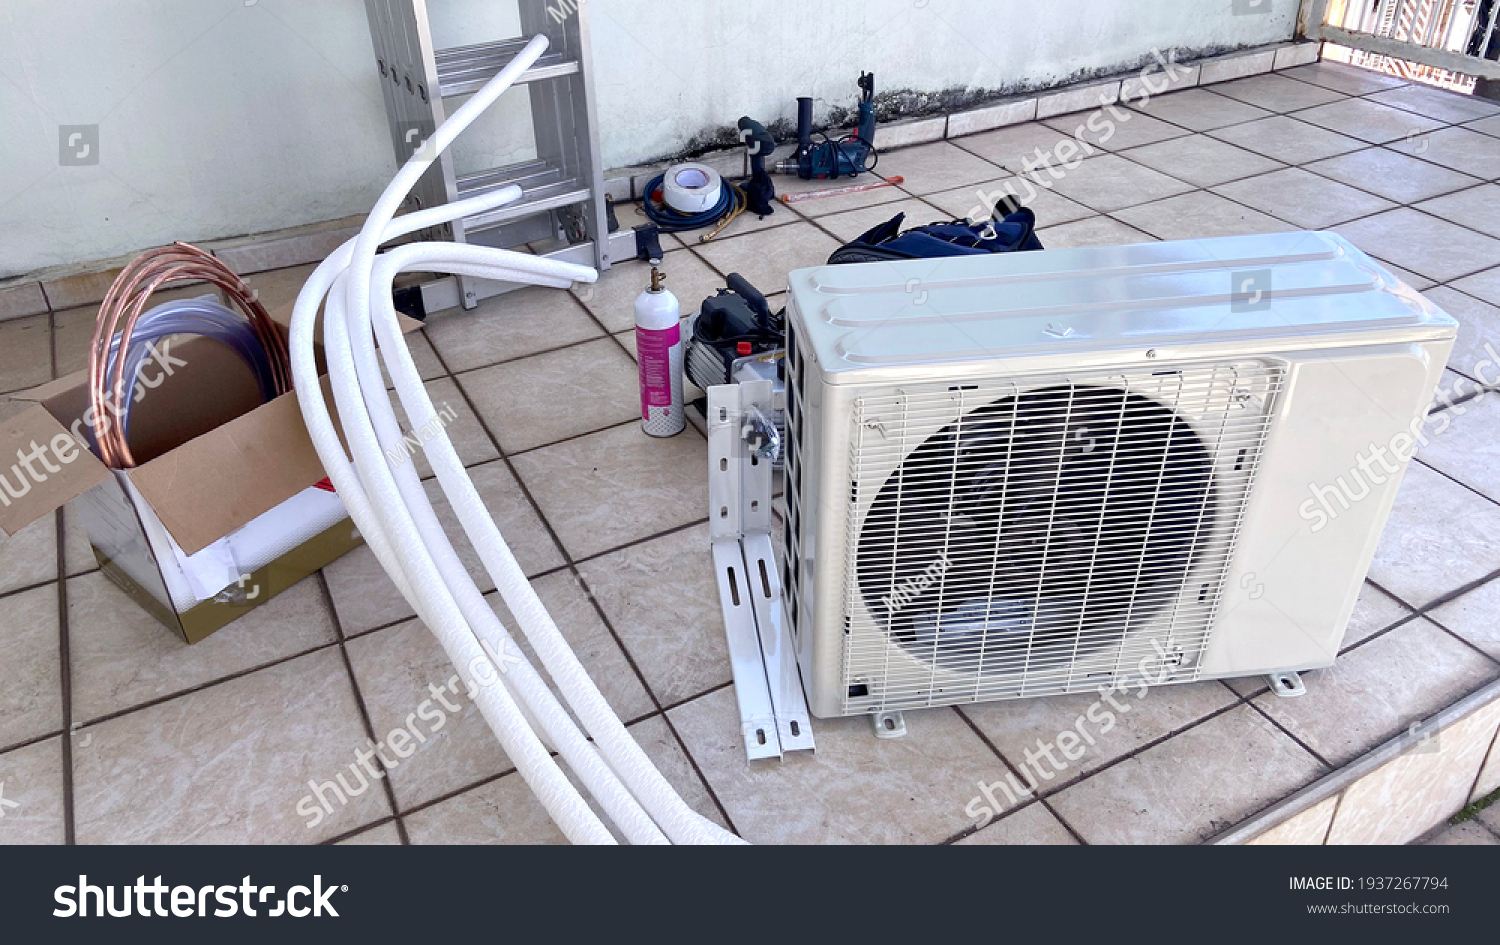 Placement of air conditioning evaporator in a Brazilian periphery home  #1937267794